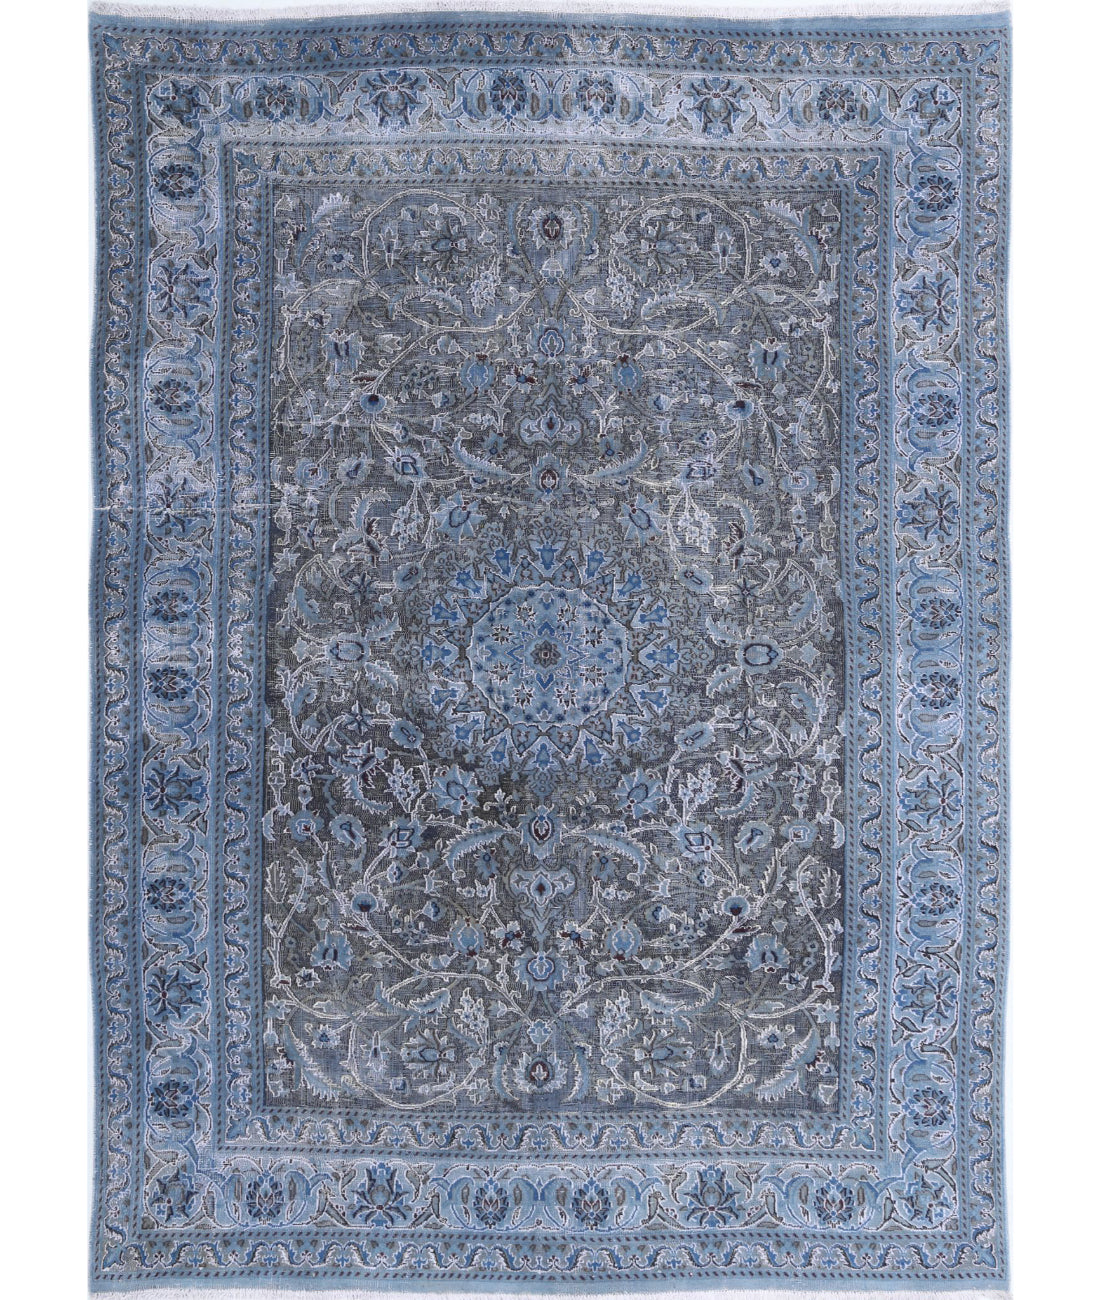 Hand Knotted Vintage Persian Nain Wool Rug - 6'5'' x 9'2'' 6'5'' x 9'2'' (193 X 275) / Blue / Blue